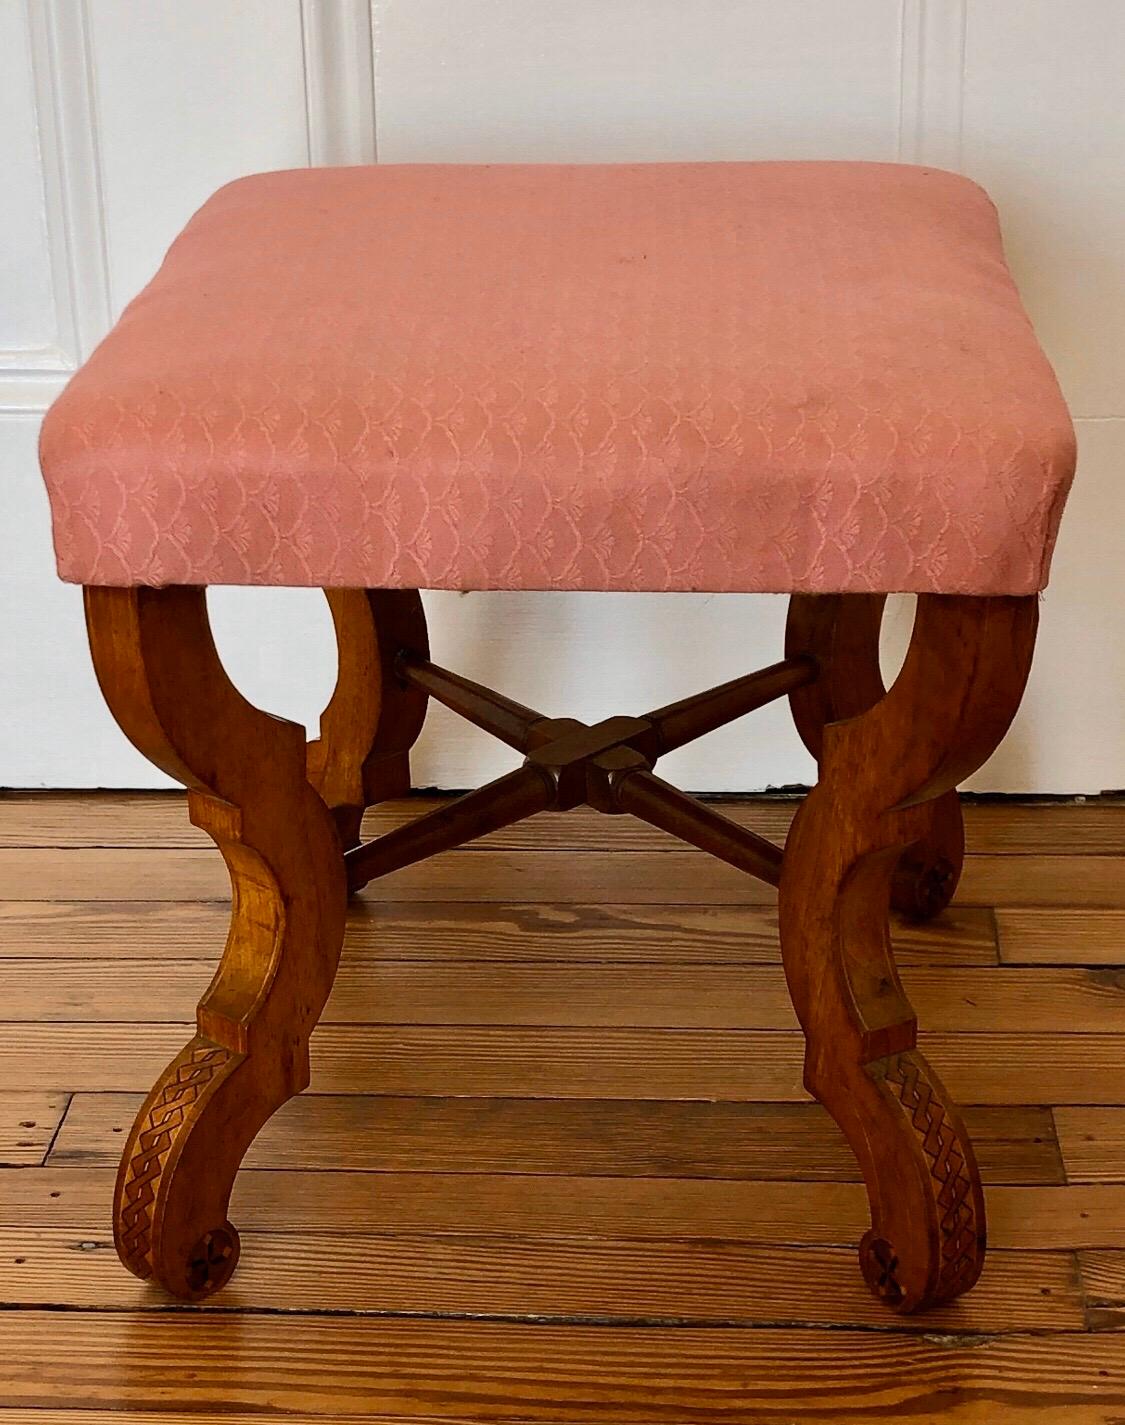 This Biedermeier stool has elegant legs with twist inlay running down the front foot of each leg with inlaid rosettes on each side. The bench has a turned X-stretcher between the legs giving them extra support.